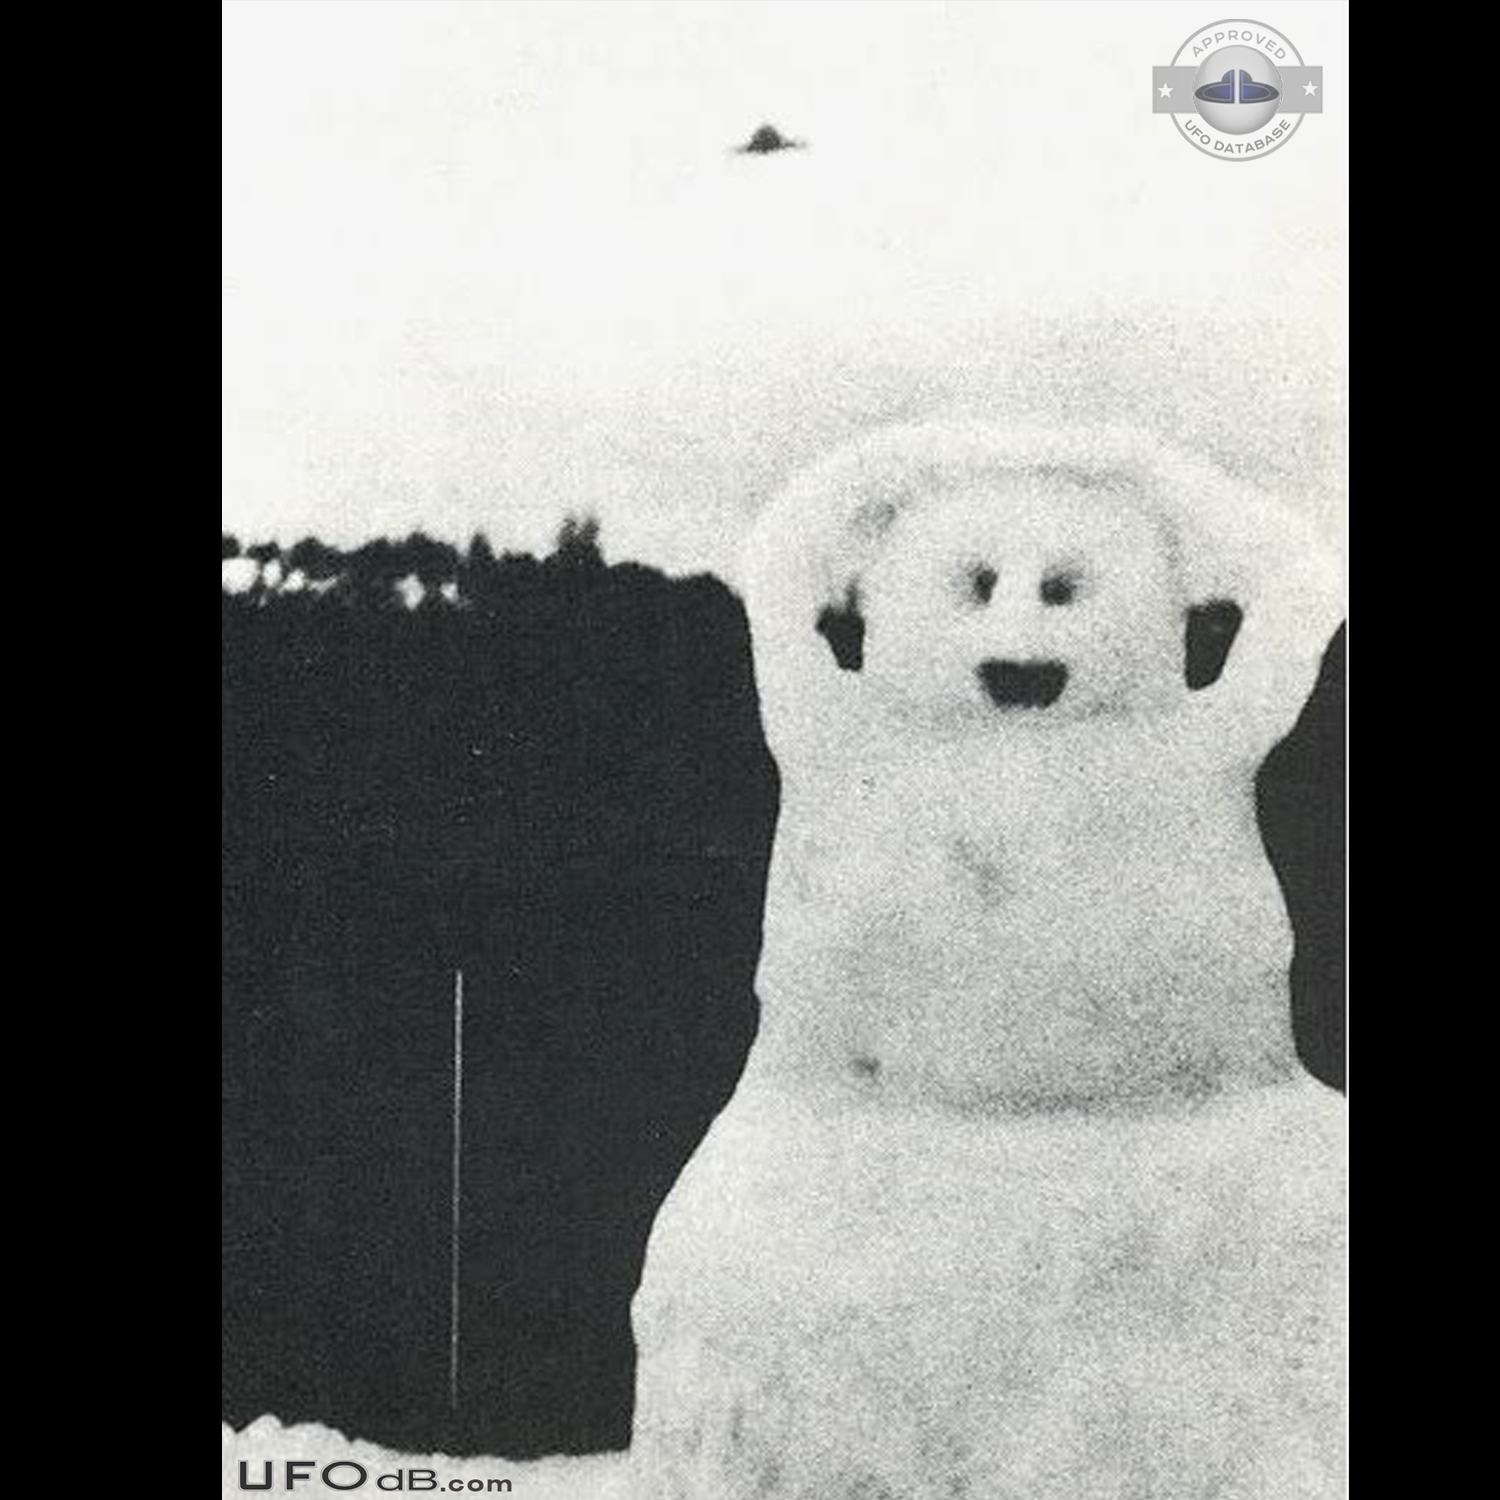 Picture of snowman in Nanaimo BC Canada gets a passing saucer UFO 1975 UFO Picture #498-1